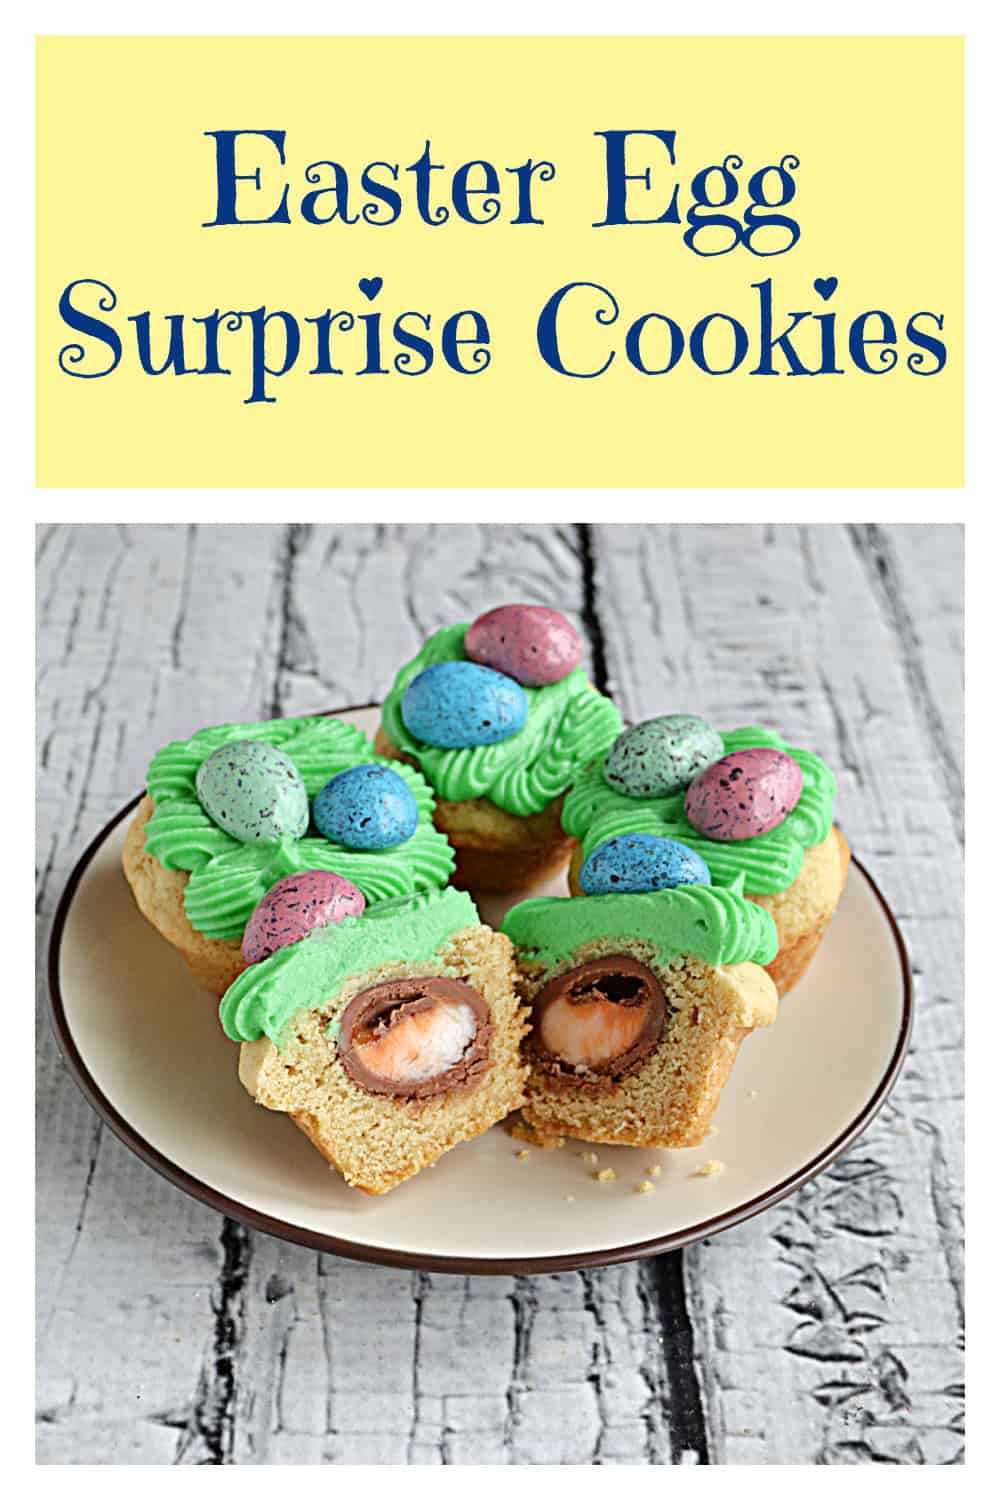 Pin Image: Text title, A plate of Easter egg surprise cookies with one cookie cut in half to show the Cadbury egg filling.